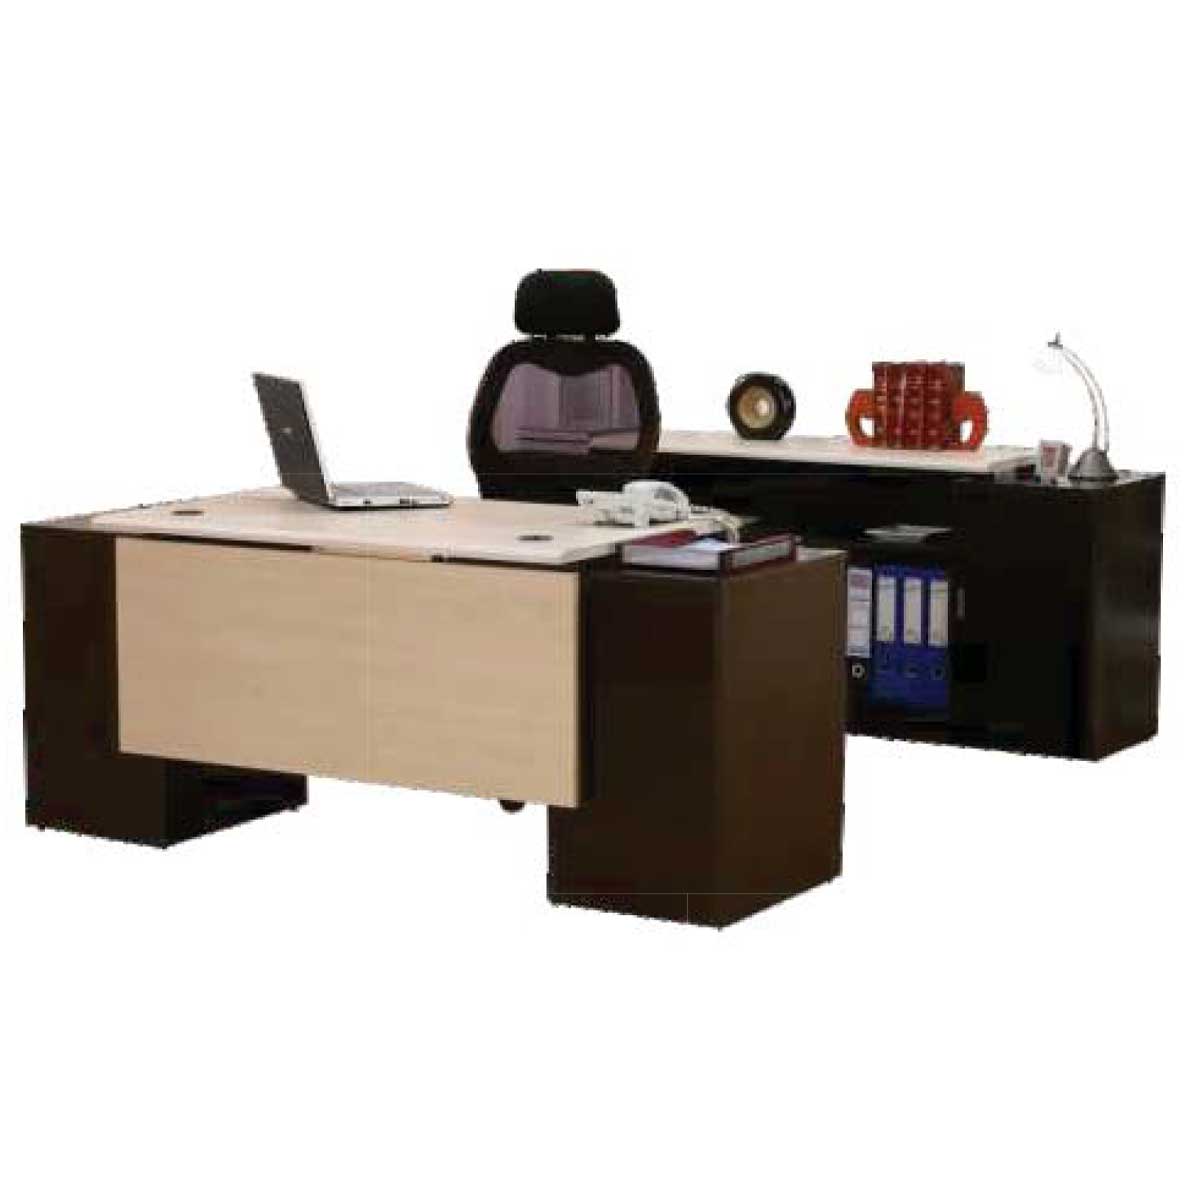 Executive Office Table Manufacturers, Suppliers in Noida City Center